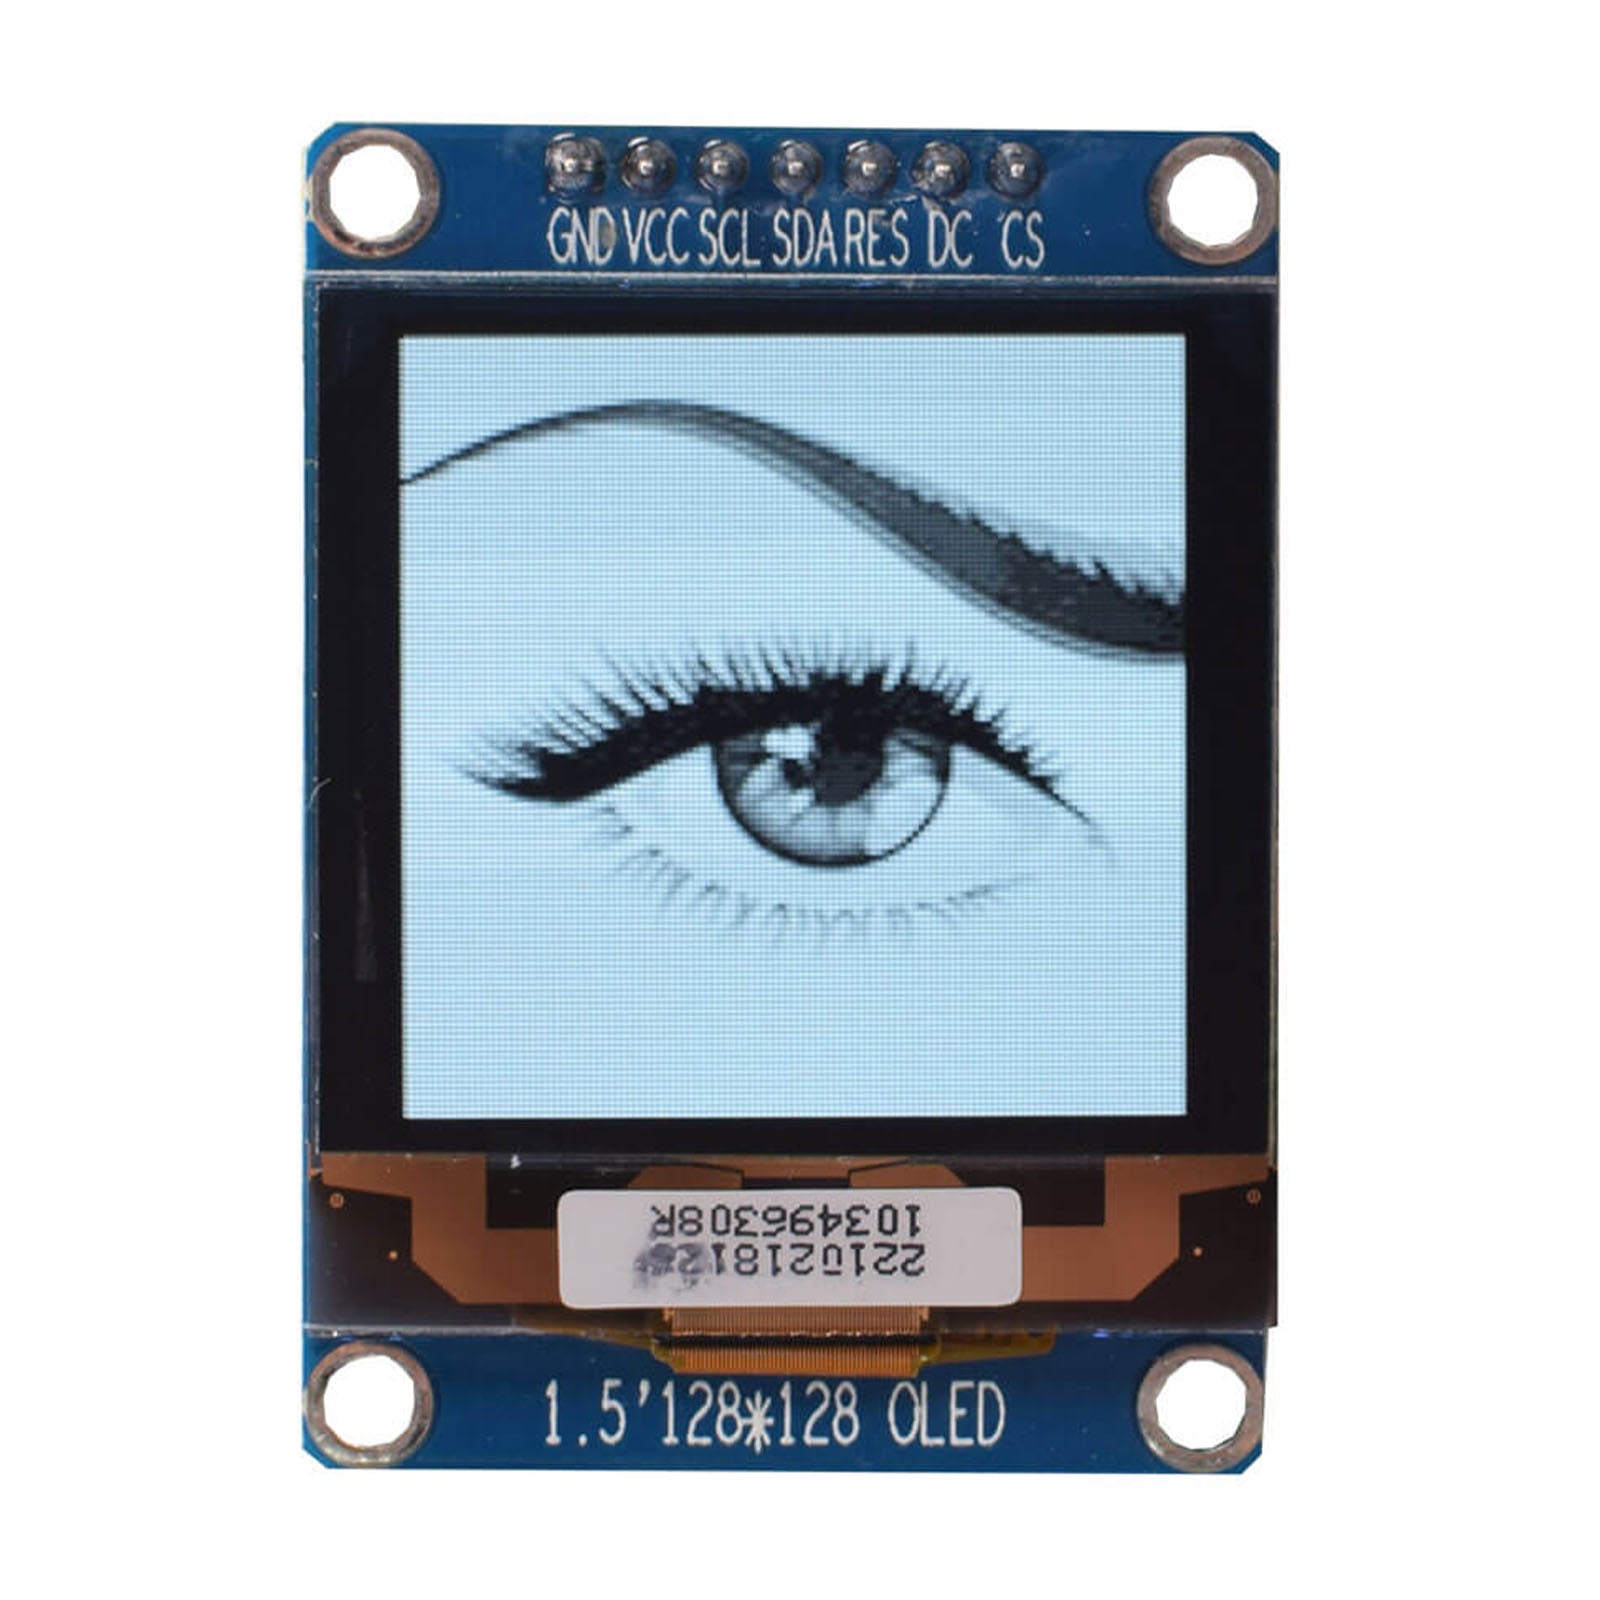 1.5-inch OLED graphic display module with a 128x128 resolution showing a woman's eyes